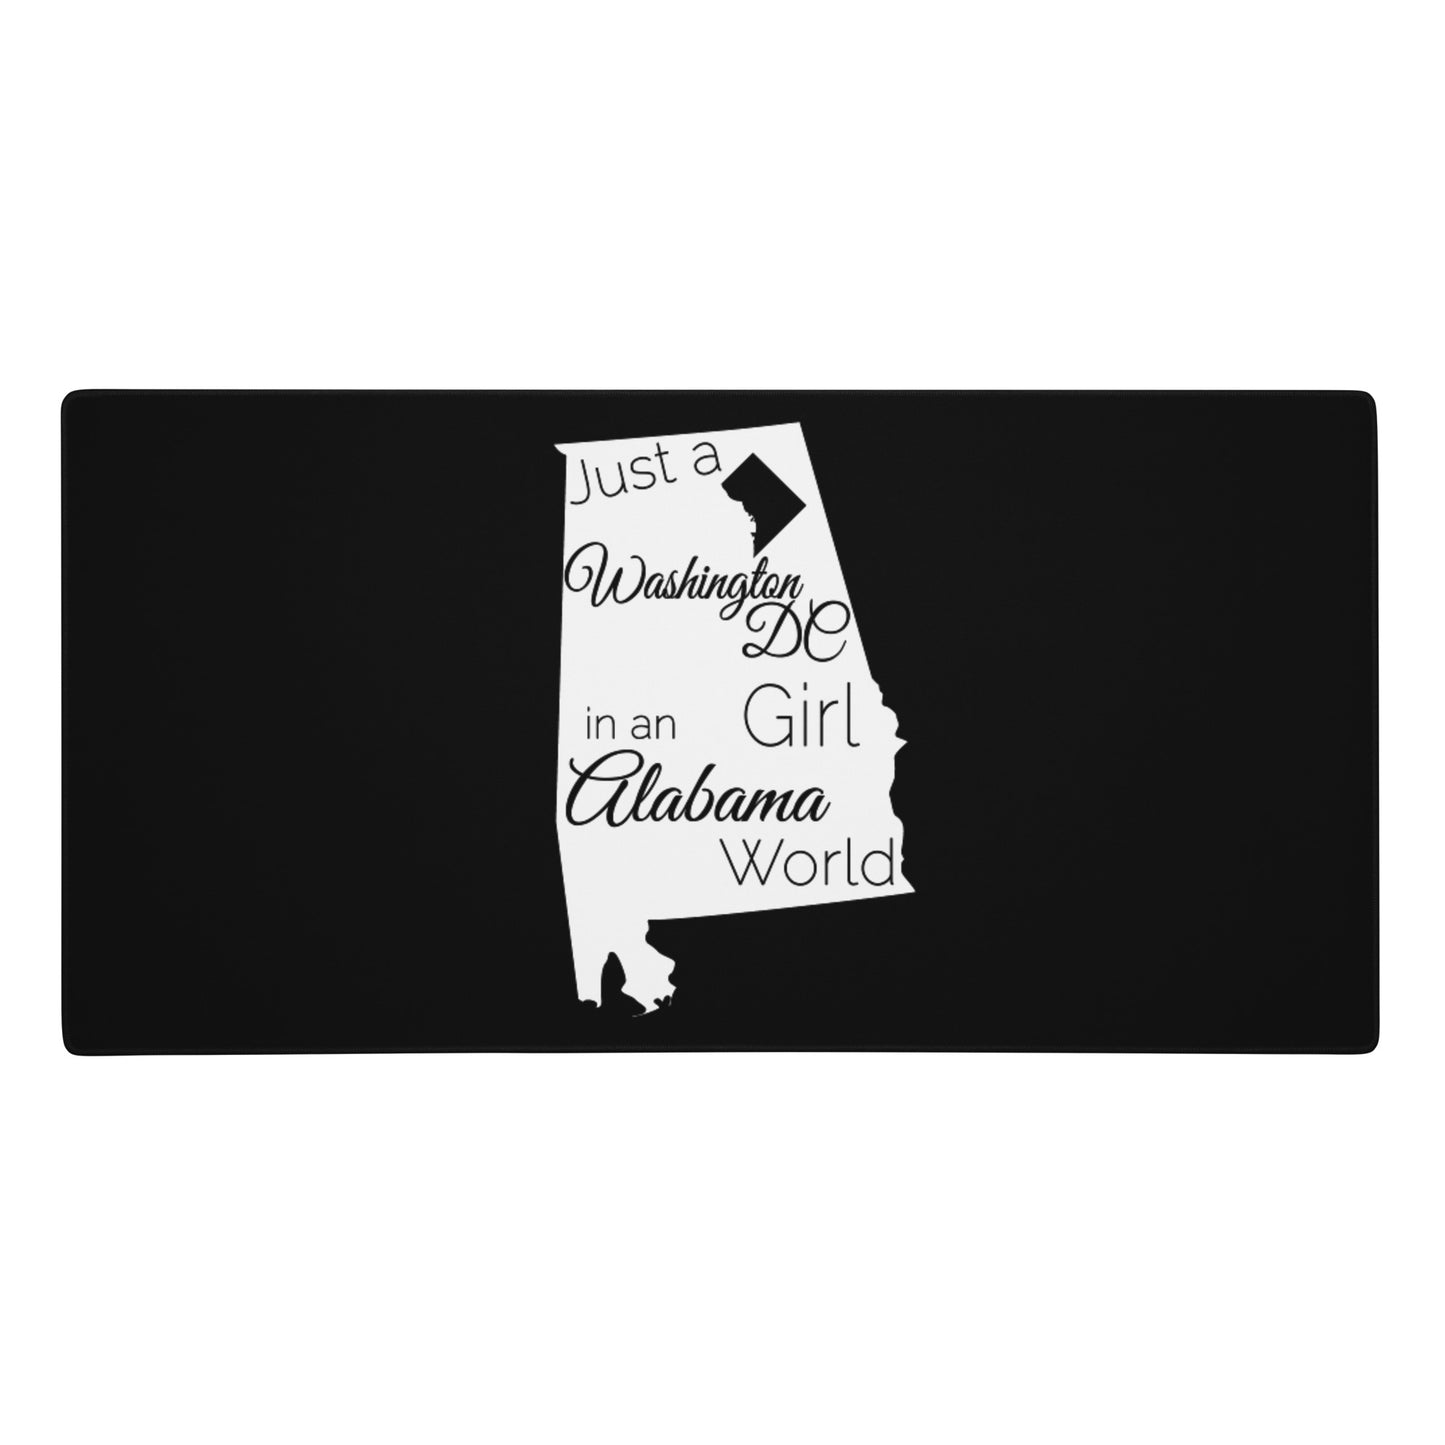 Just a Washington DC Girl in an Alabama World Gaming mouse pad